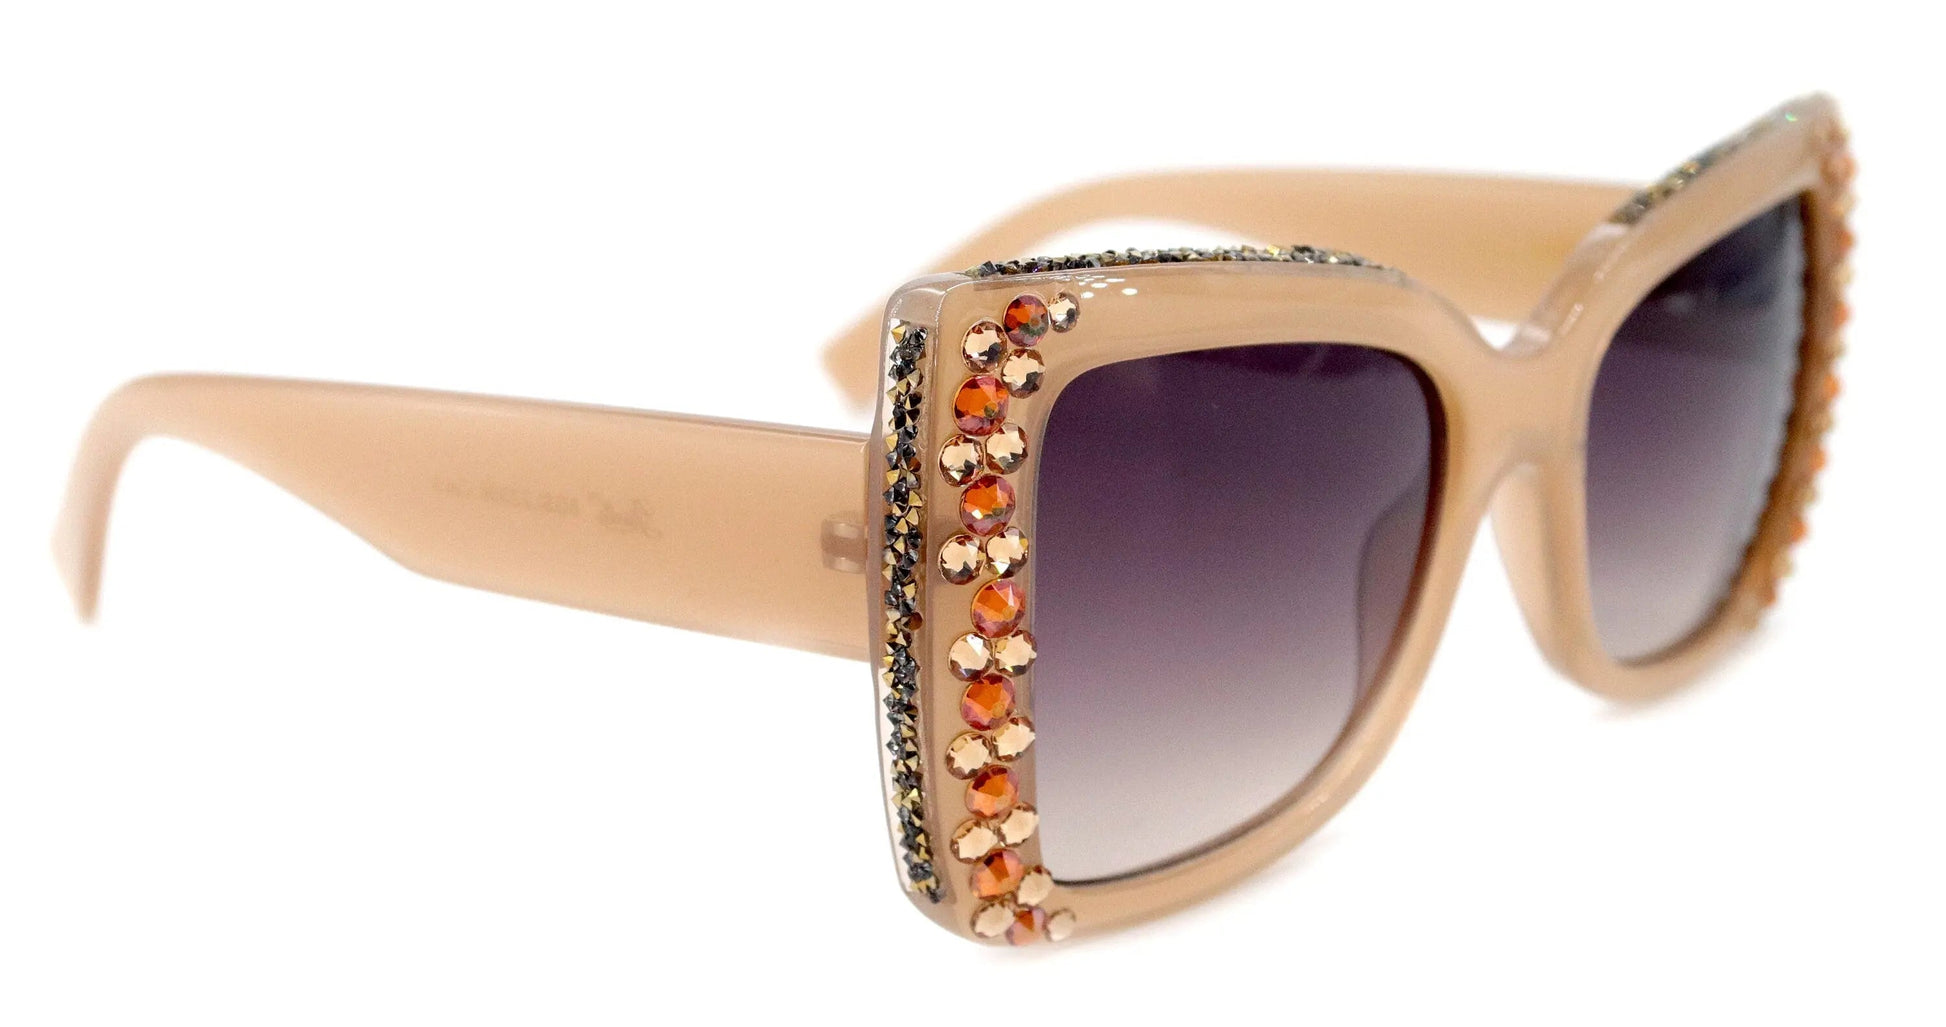 The Monarch, (Bling) Women Sunglasses W (Cooper, Light Colorado) Genuine European Crystals (Tan) Large Cat Eye NY Fifth Avenue 